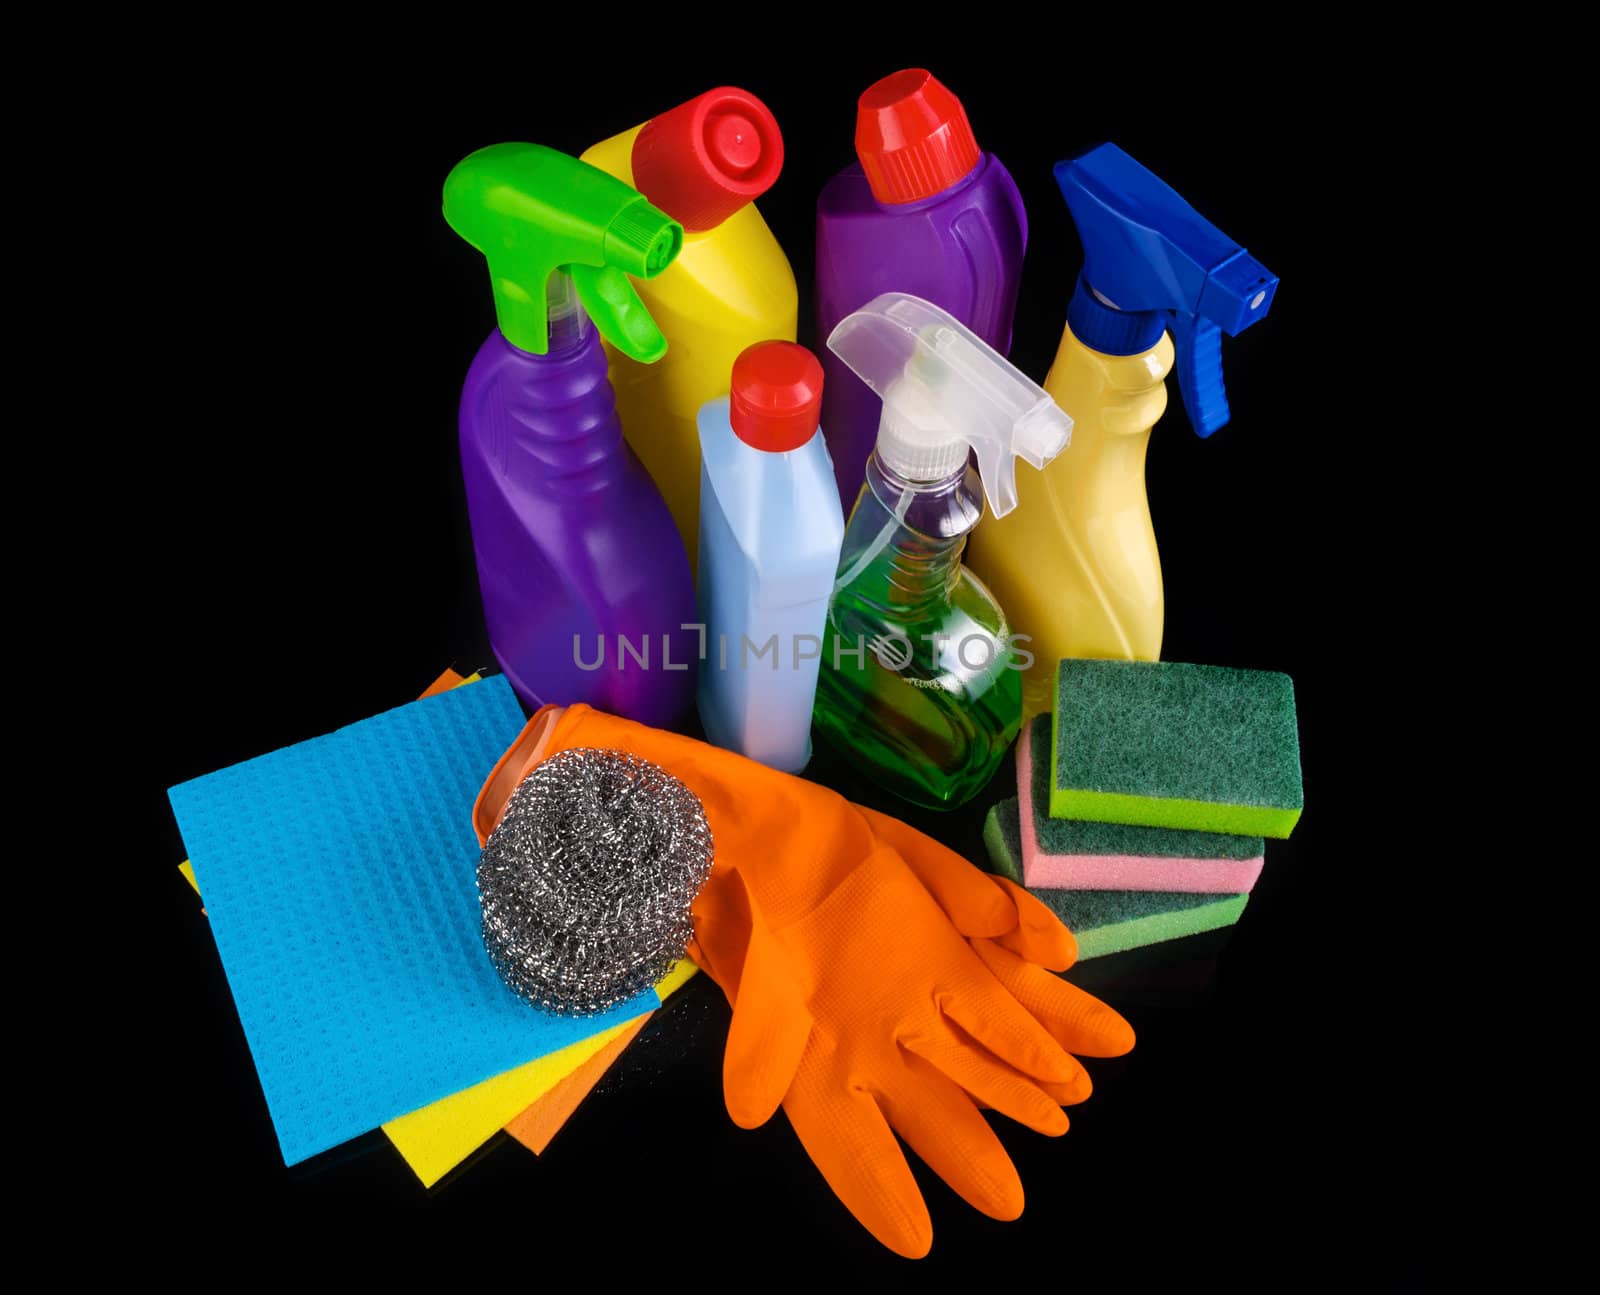 Subjects for sanitary cleaning a house by Draw05